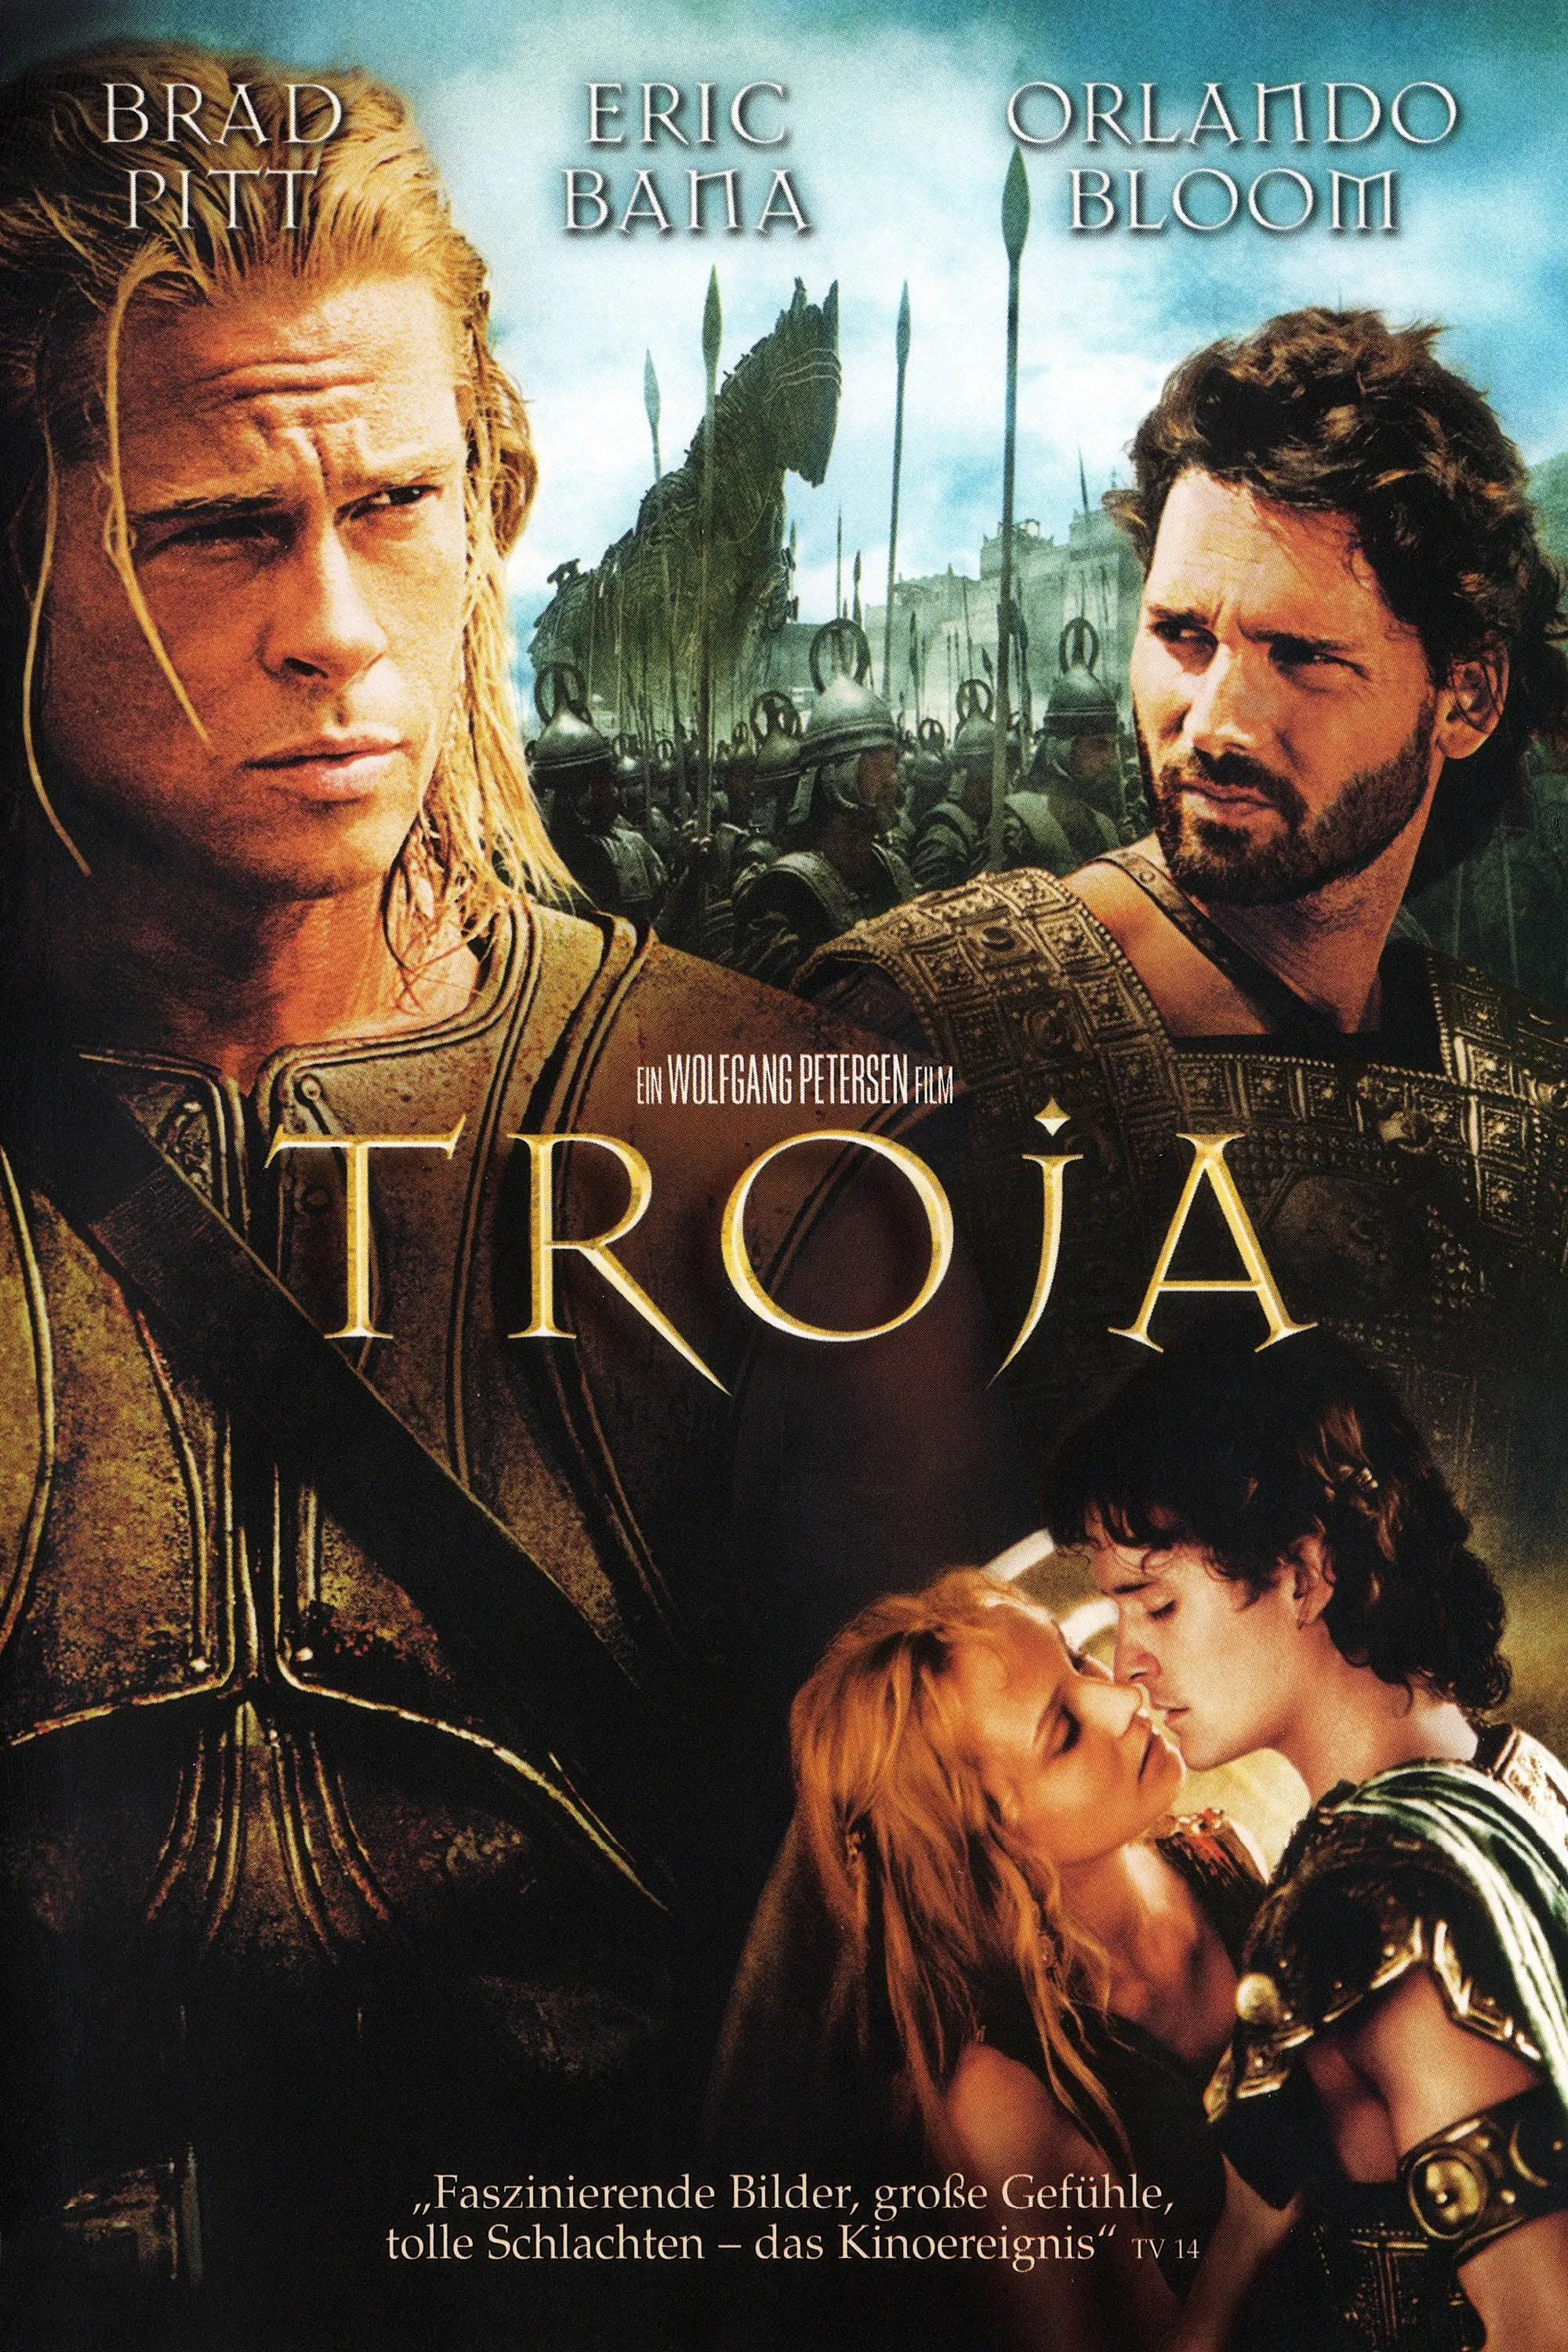 troy movie review roger ebert